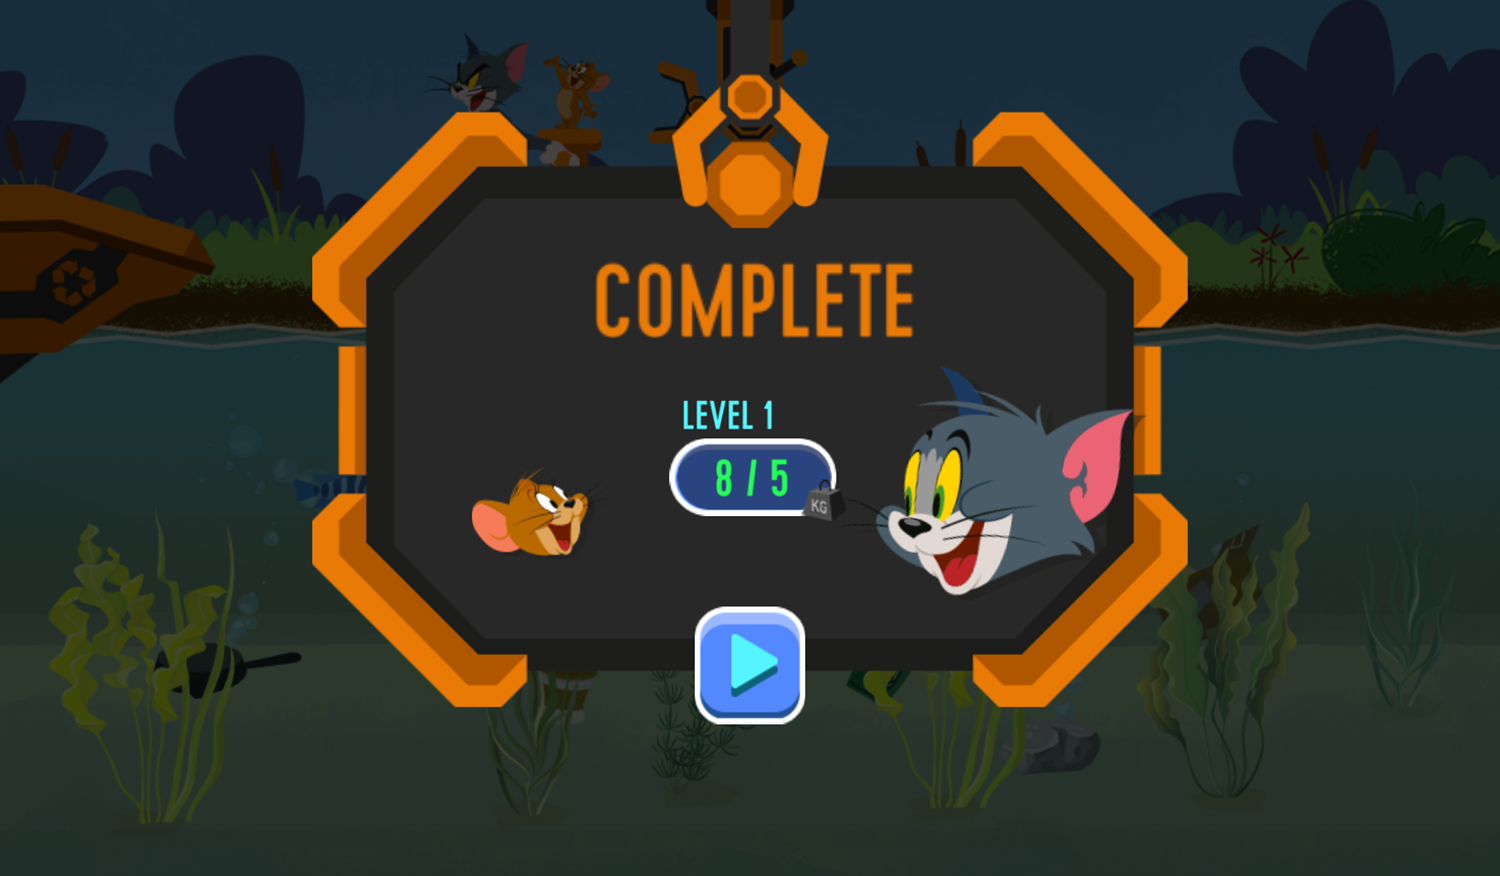 Tom and Jerry River Recycle Game Level Complete Screenshot.